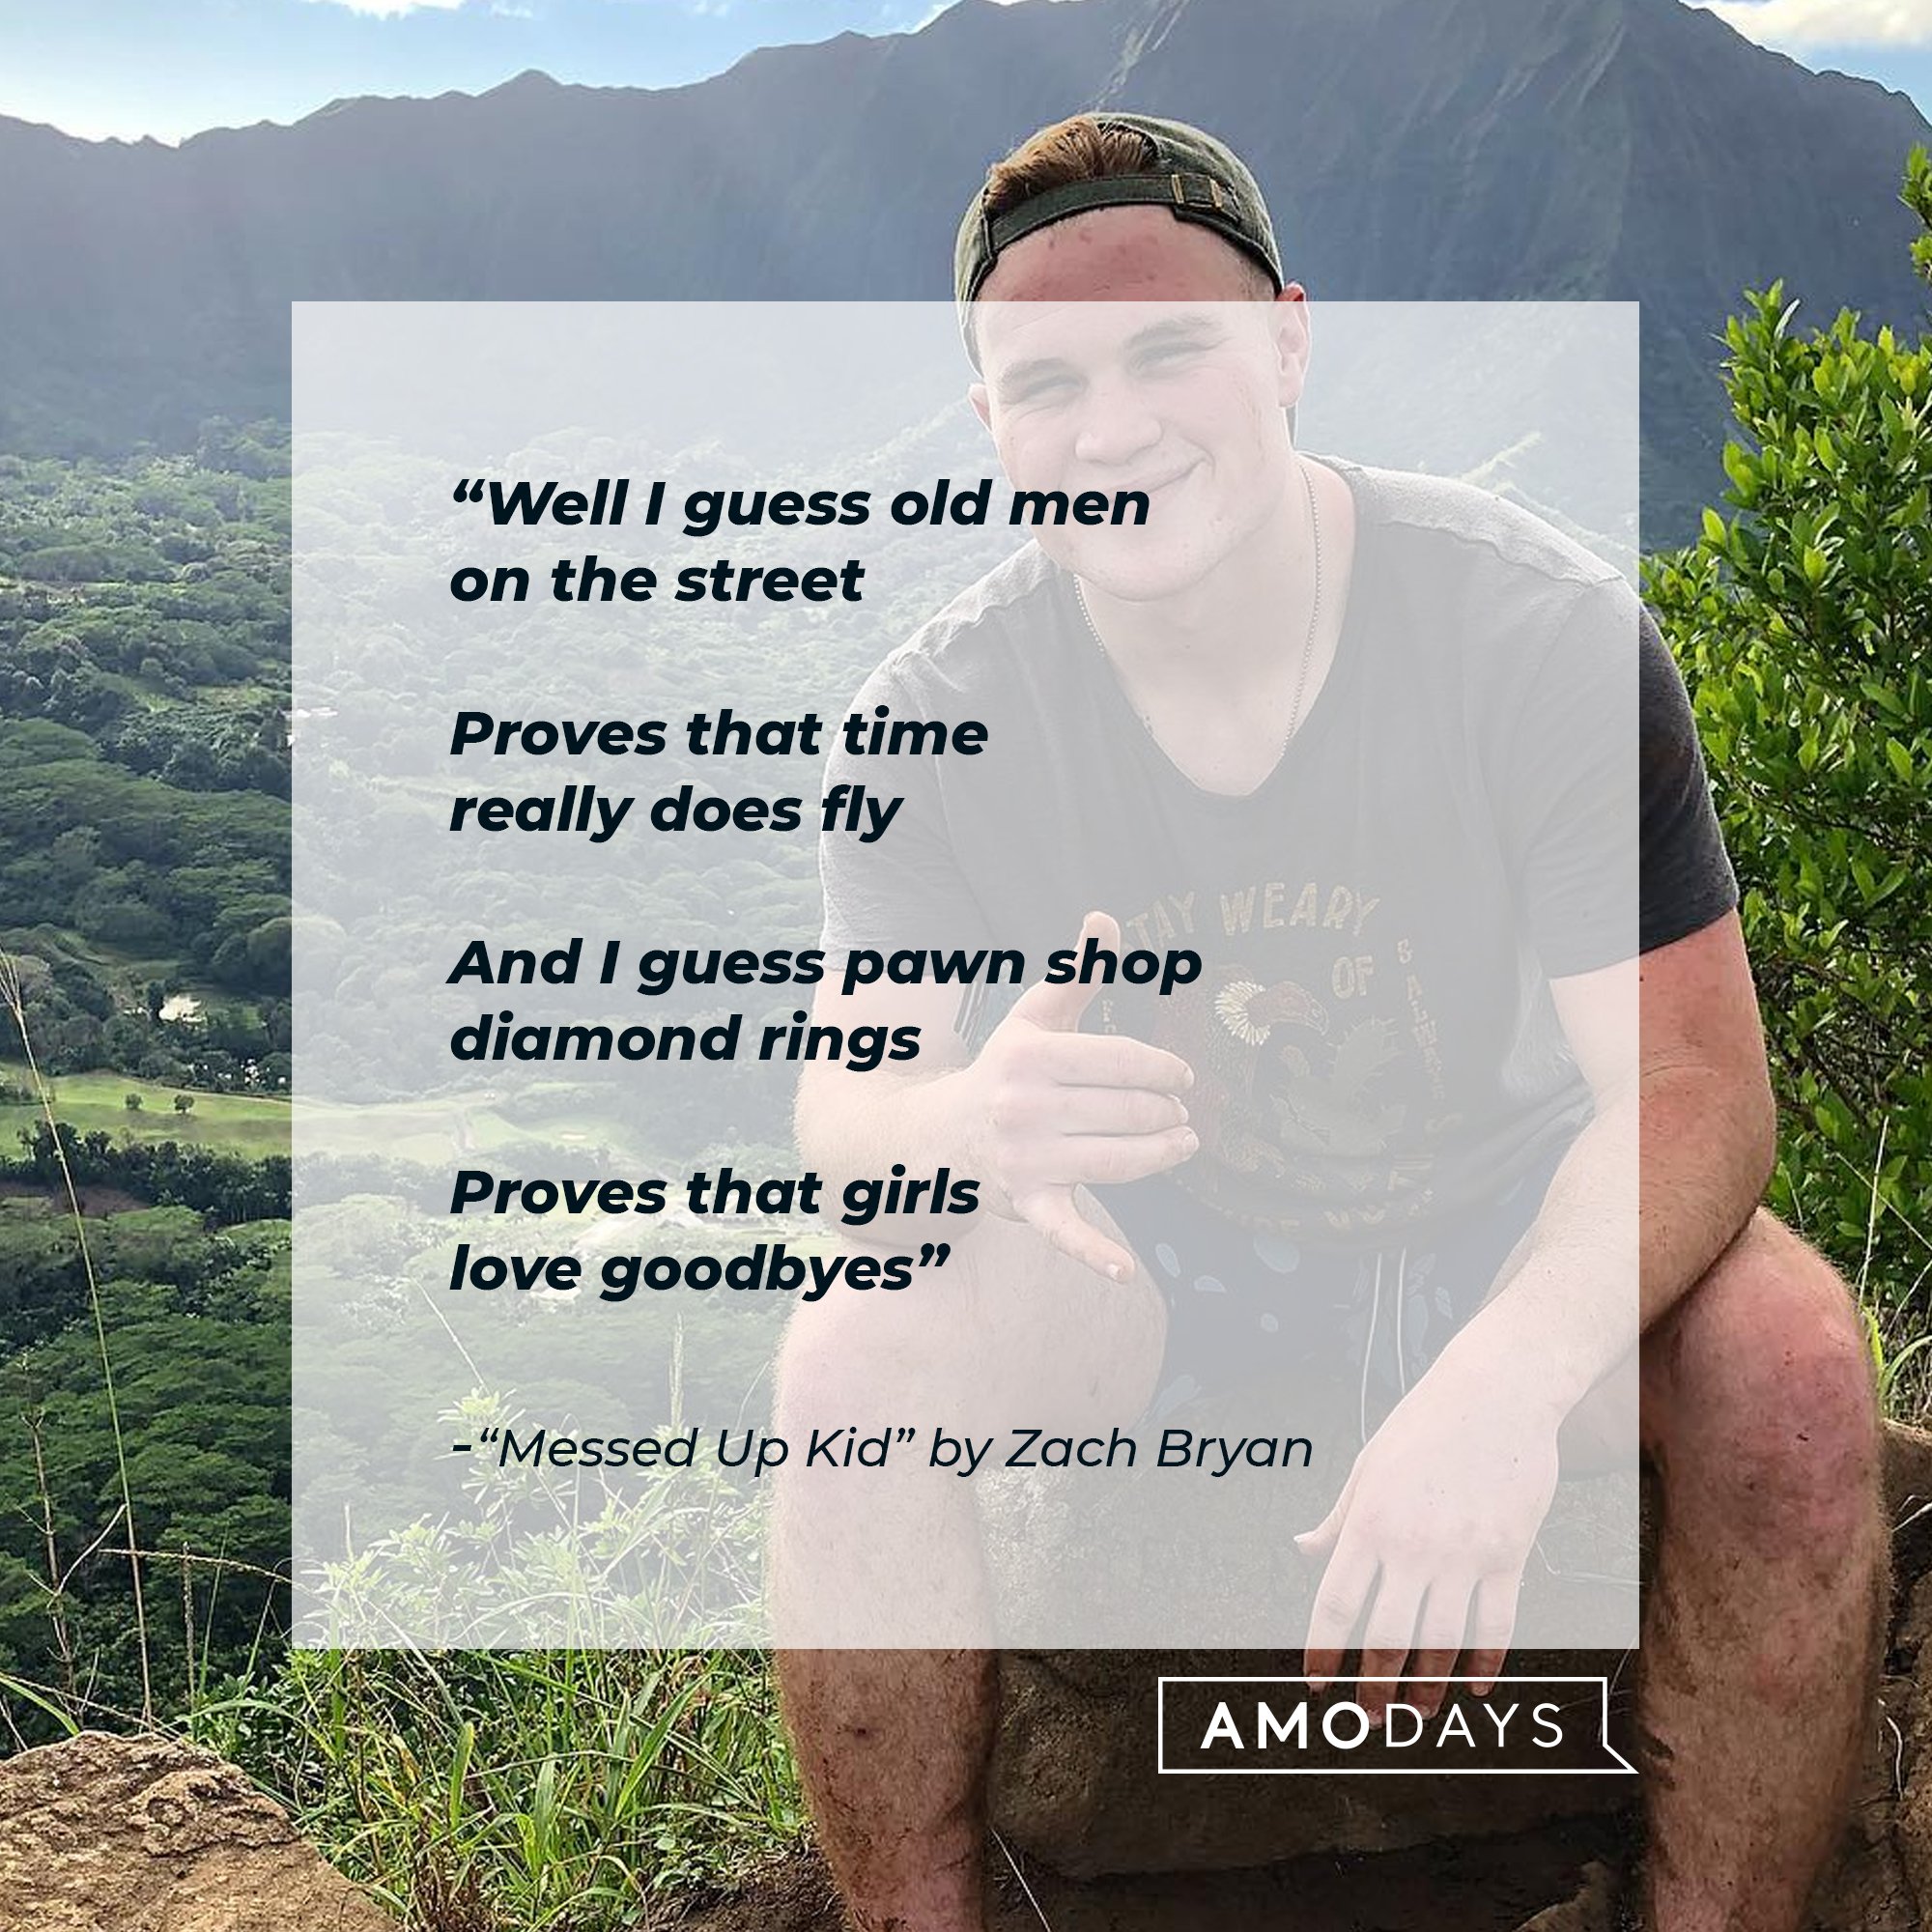 Zach Bryan’s lyrics from “Messed Up Kid” : "Well I guess old men on the street/Proves that time really does fly/And I guess pawn shop diamond rings/Proves that girls love goodbyes" | Image: AmoDays